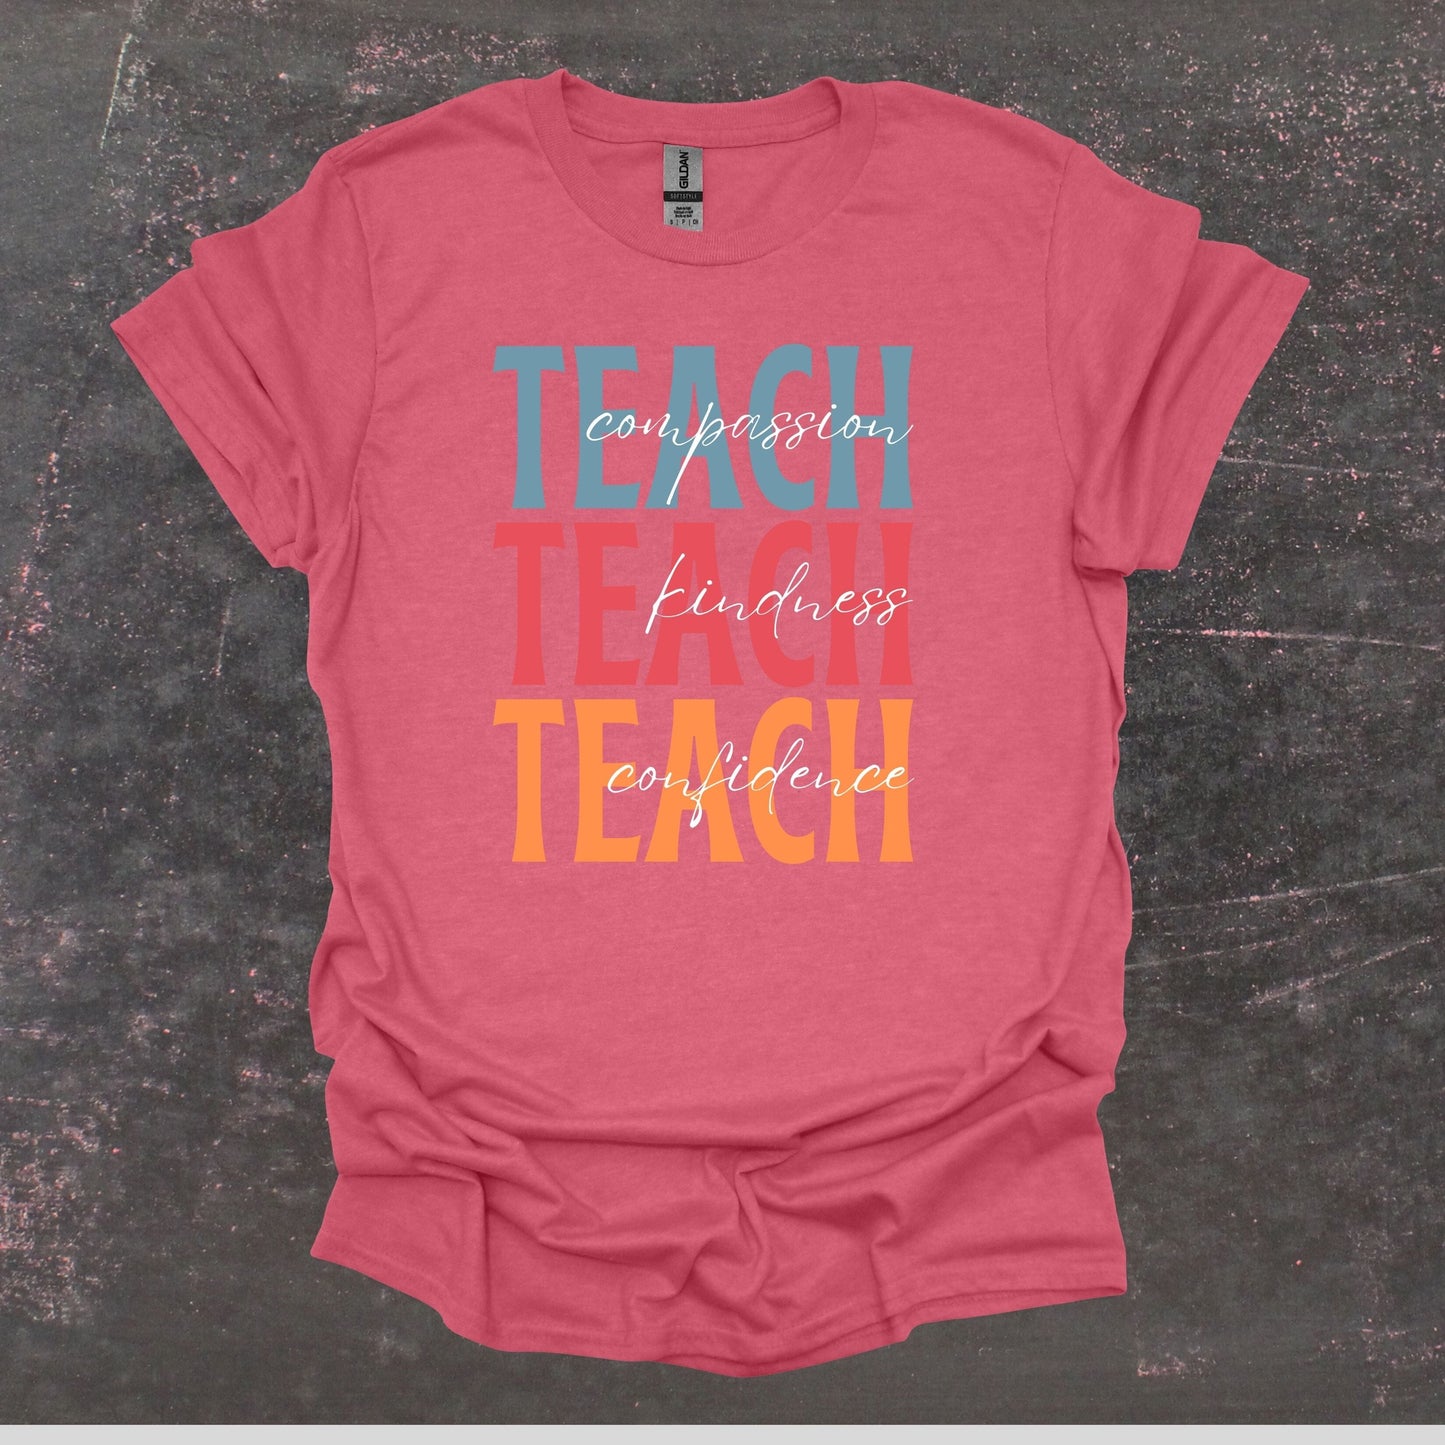 Teach Compassion Kindness Confidence - Teacher T Shirt - Adult Tee Shirts T-Shirts Graphic Avenue Heather Cardinal Adult Small 